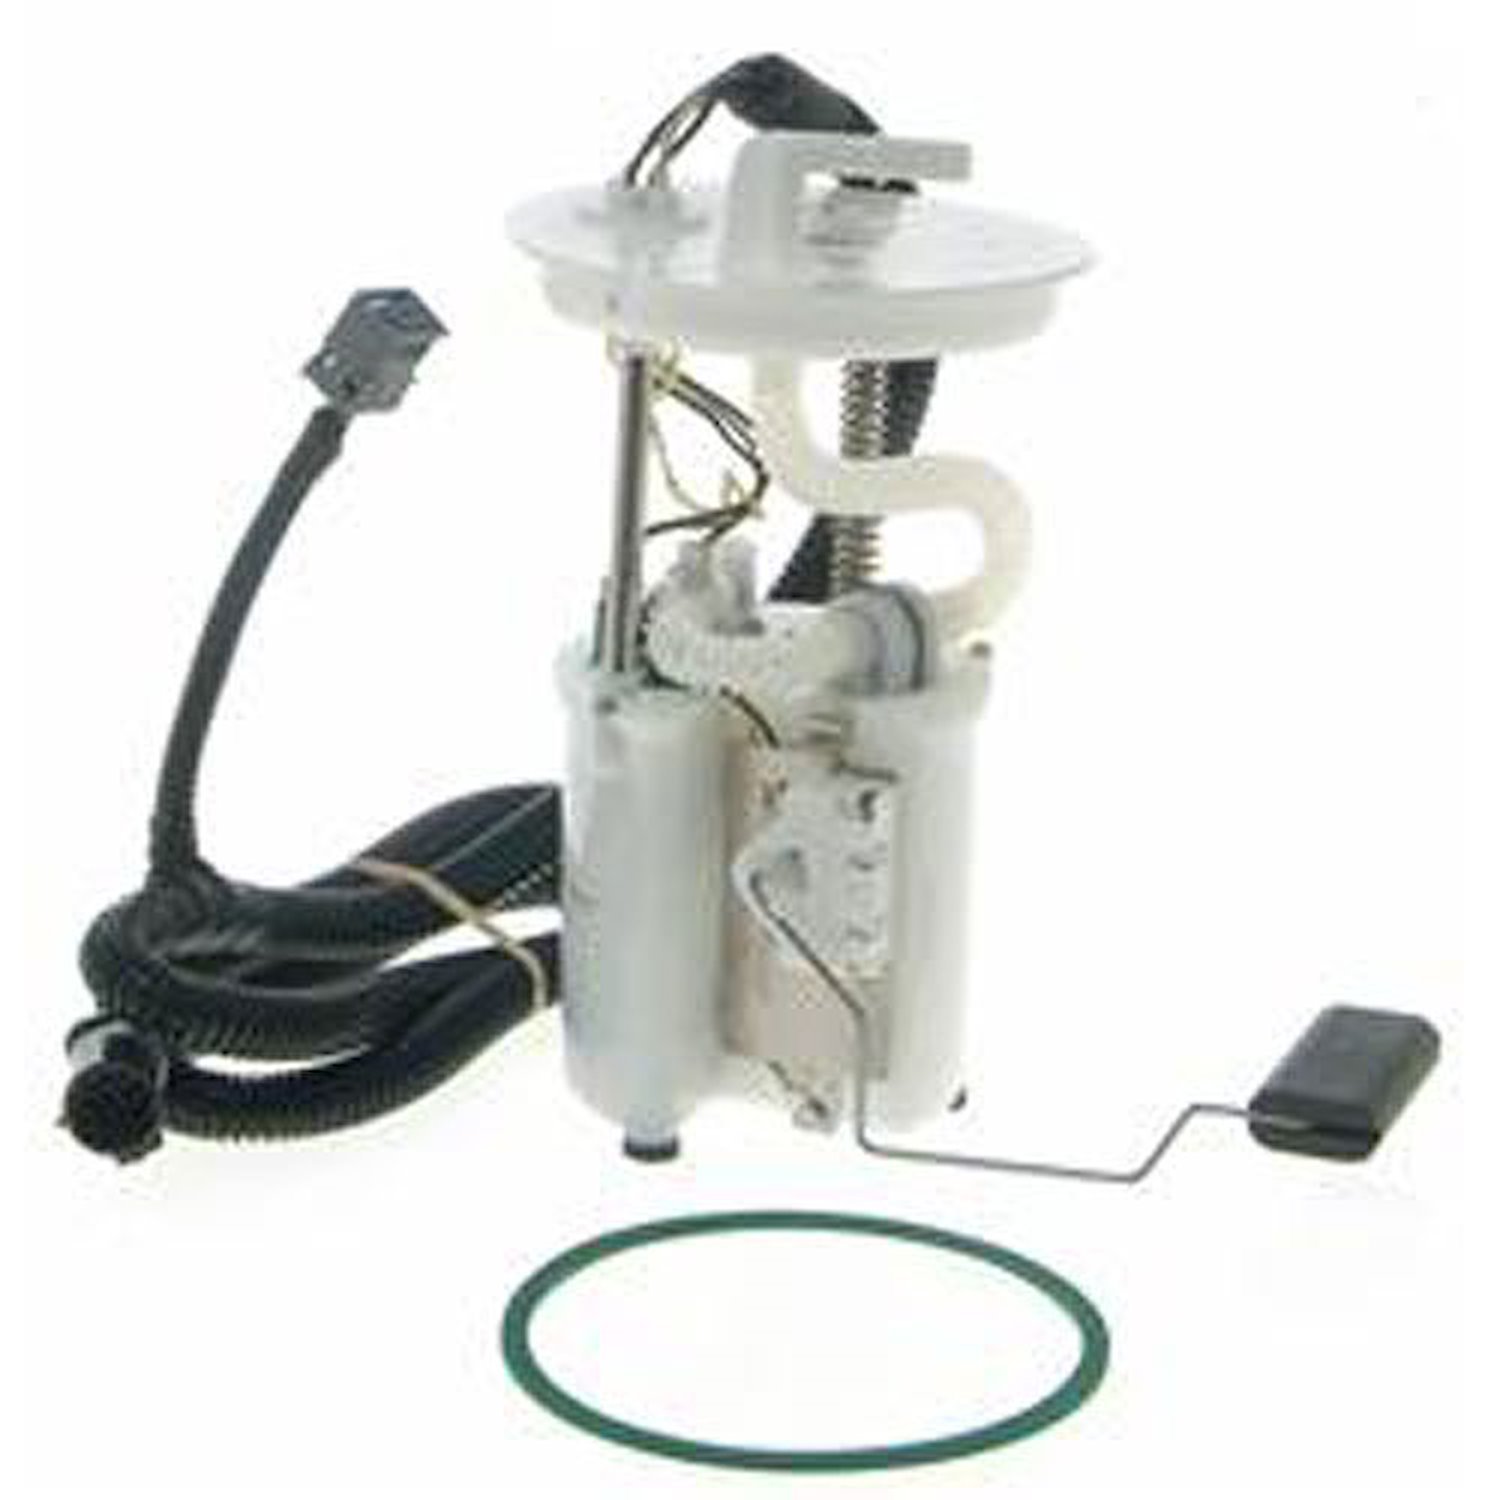 OE Ford Replacement Electric Fuel Pump Module Assembly 2004-05 Ford Freestar 3.9L/4.2L V6